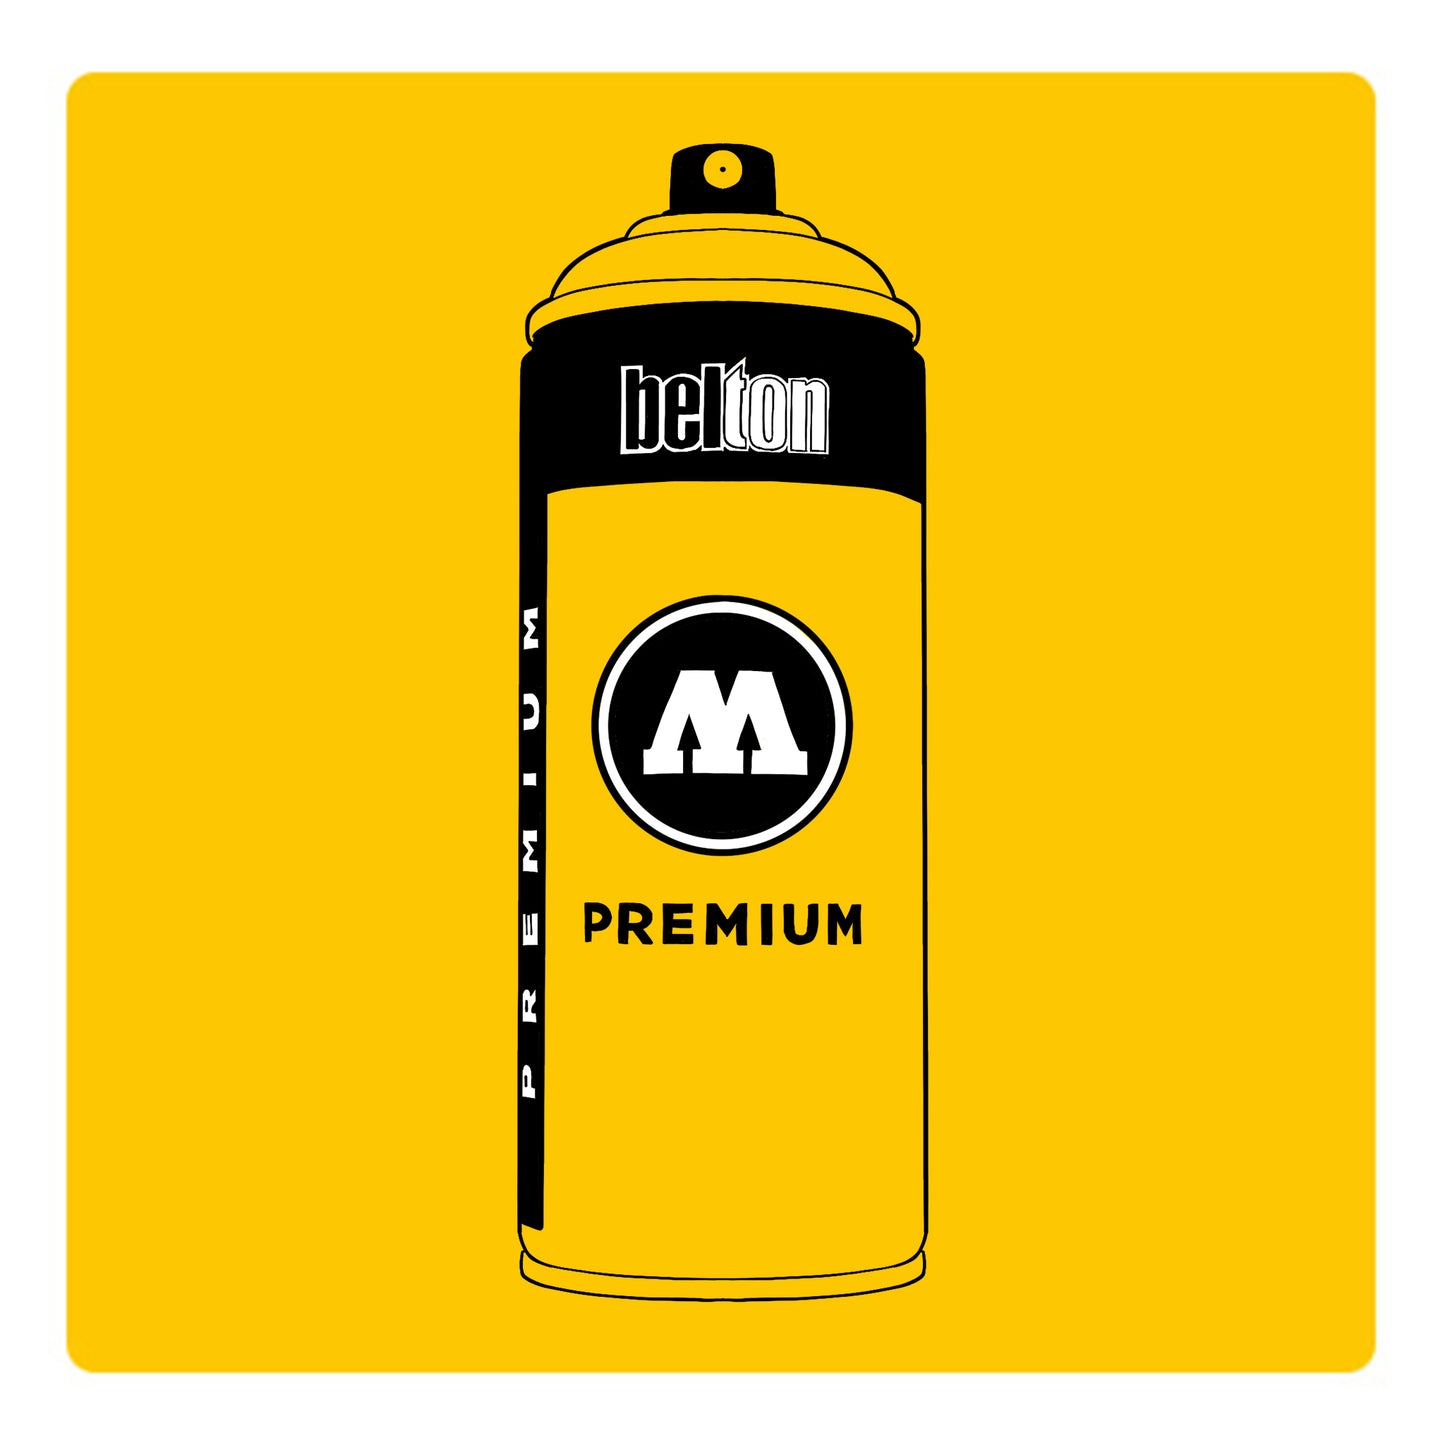 A black outline drawing of a saffron yellow spray paint can with the words "belton","premium" and the letter"M" written on the face in black and white font. The background is a color swatch of the same saffron yellow with a white border.